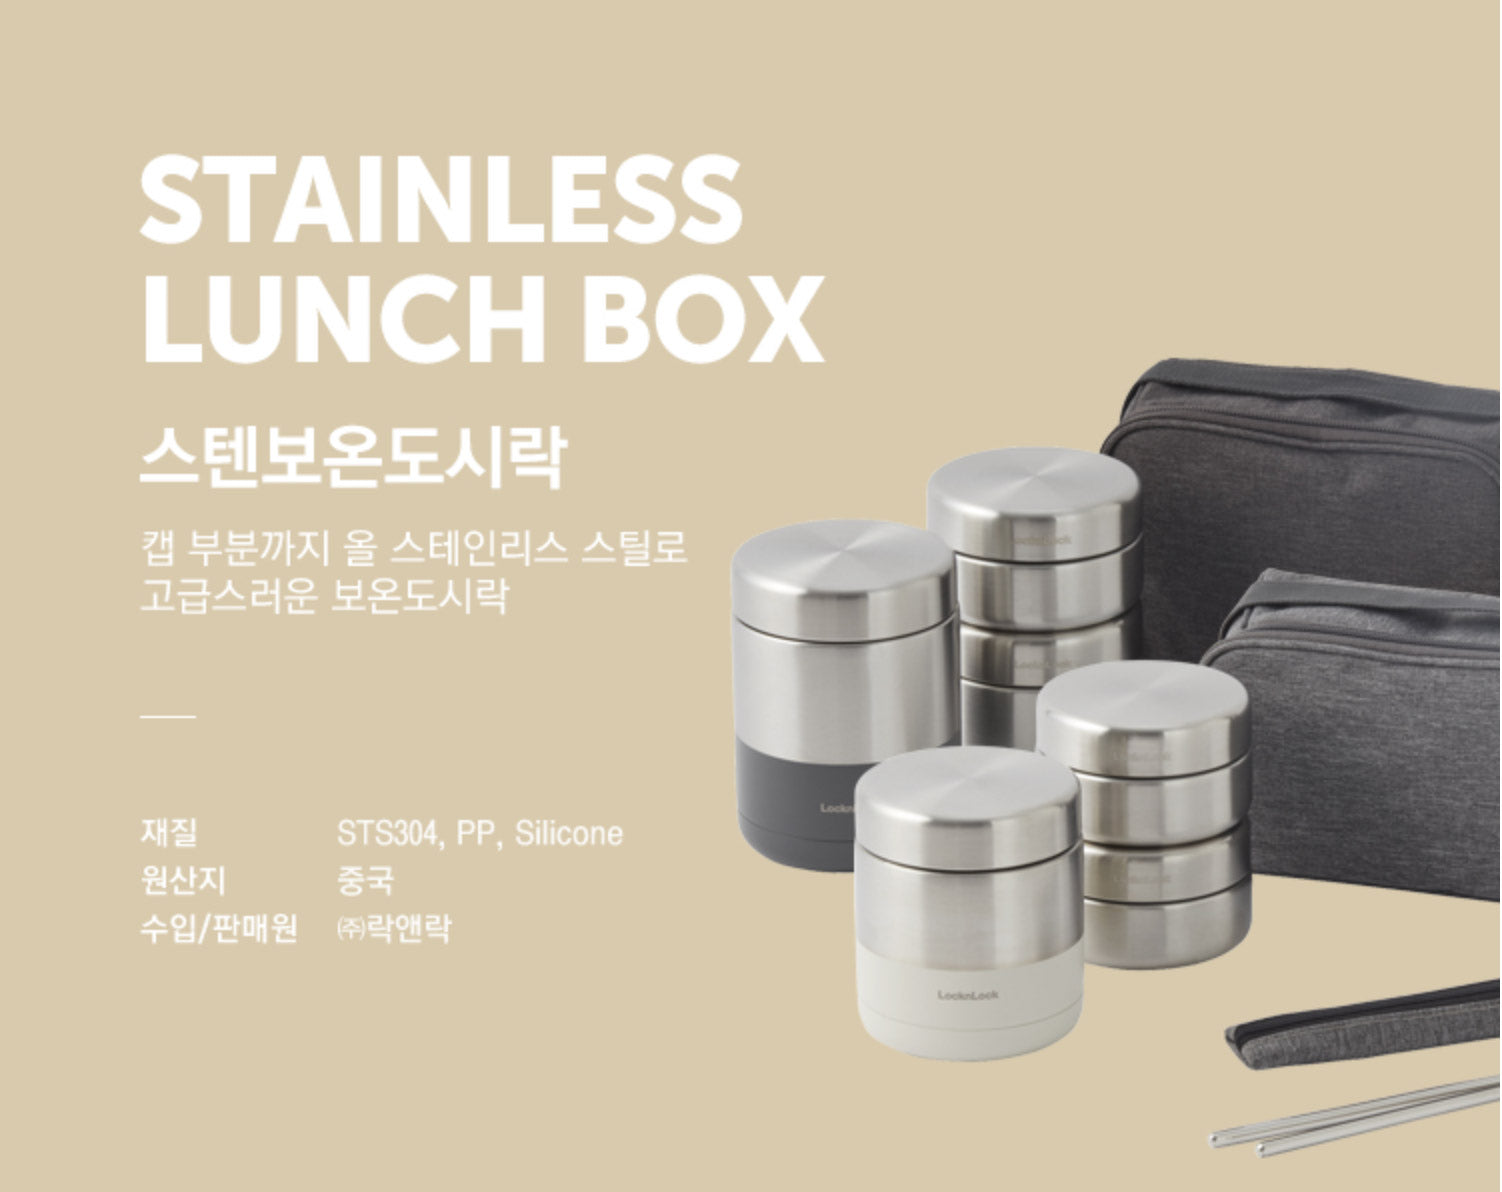 Lock & Lock 304 Stainless Steel Thermal Lunch box Food Container Chopsticks  Set